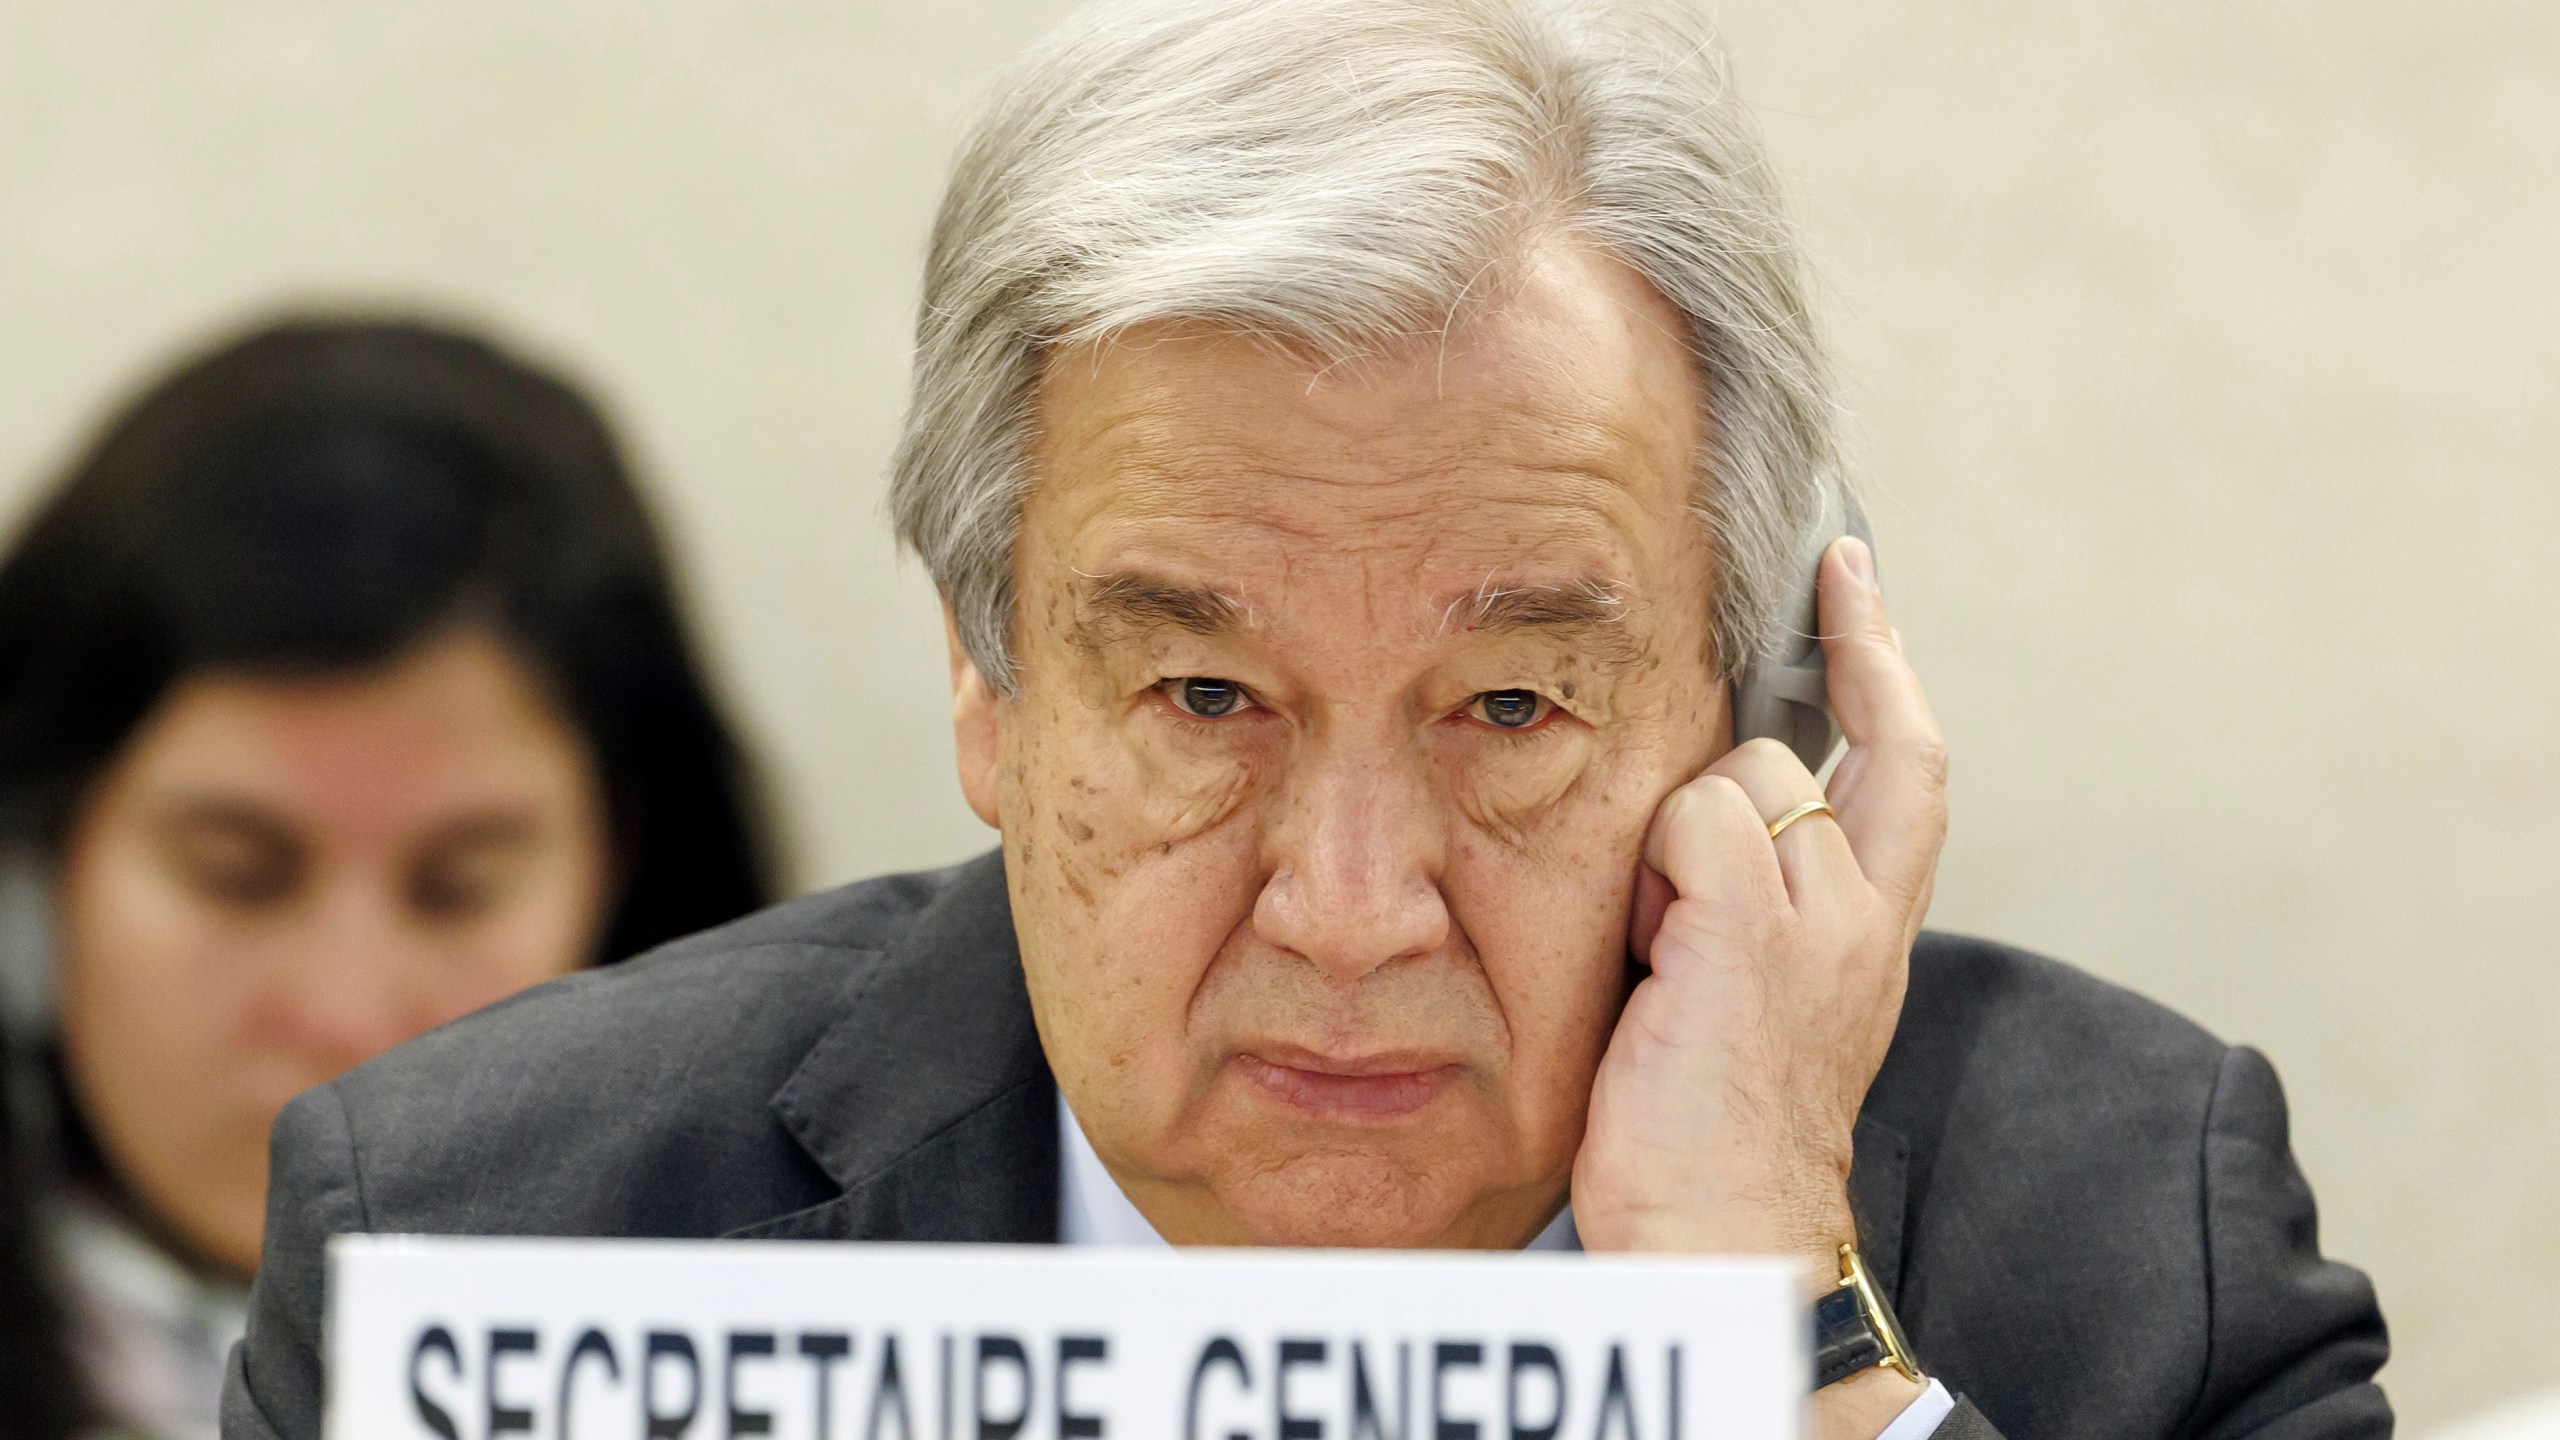 FILE - U.N. Secretary-General Antonio Guterres listens to a speech, during the opening of the High-Level Segment of the 55th session of the Human Rights Council at the European headquarters of the United Nations in Geneva, Switzerland, on Feb. 26, 2024. Military airstrikes in western Myanmar killed at least 25 members of the country’s Muslim Rohingya minority, including children, local media reported, prompting the U.N. chief to express concerns over the escalating violence. According to the reports, the airstrikes took place early on Monday March 18, 2024 morning and targeted the village of Thada, north of Minbya township in Rakhine state. (Salvatore Di Nolfi/Keystone via AP, File)